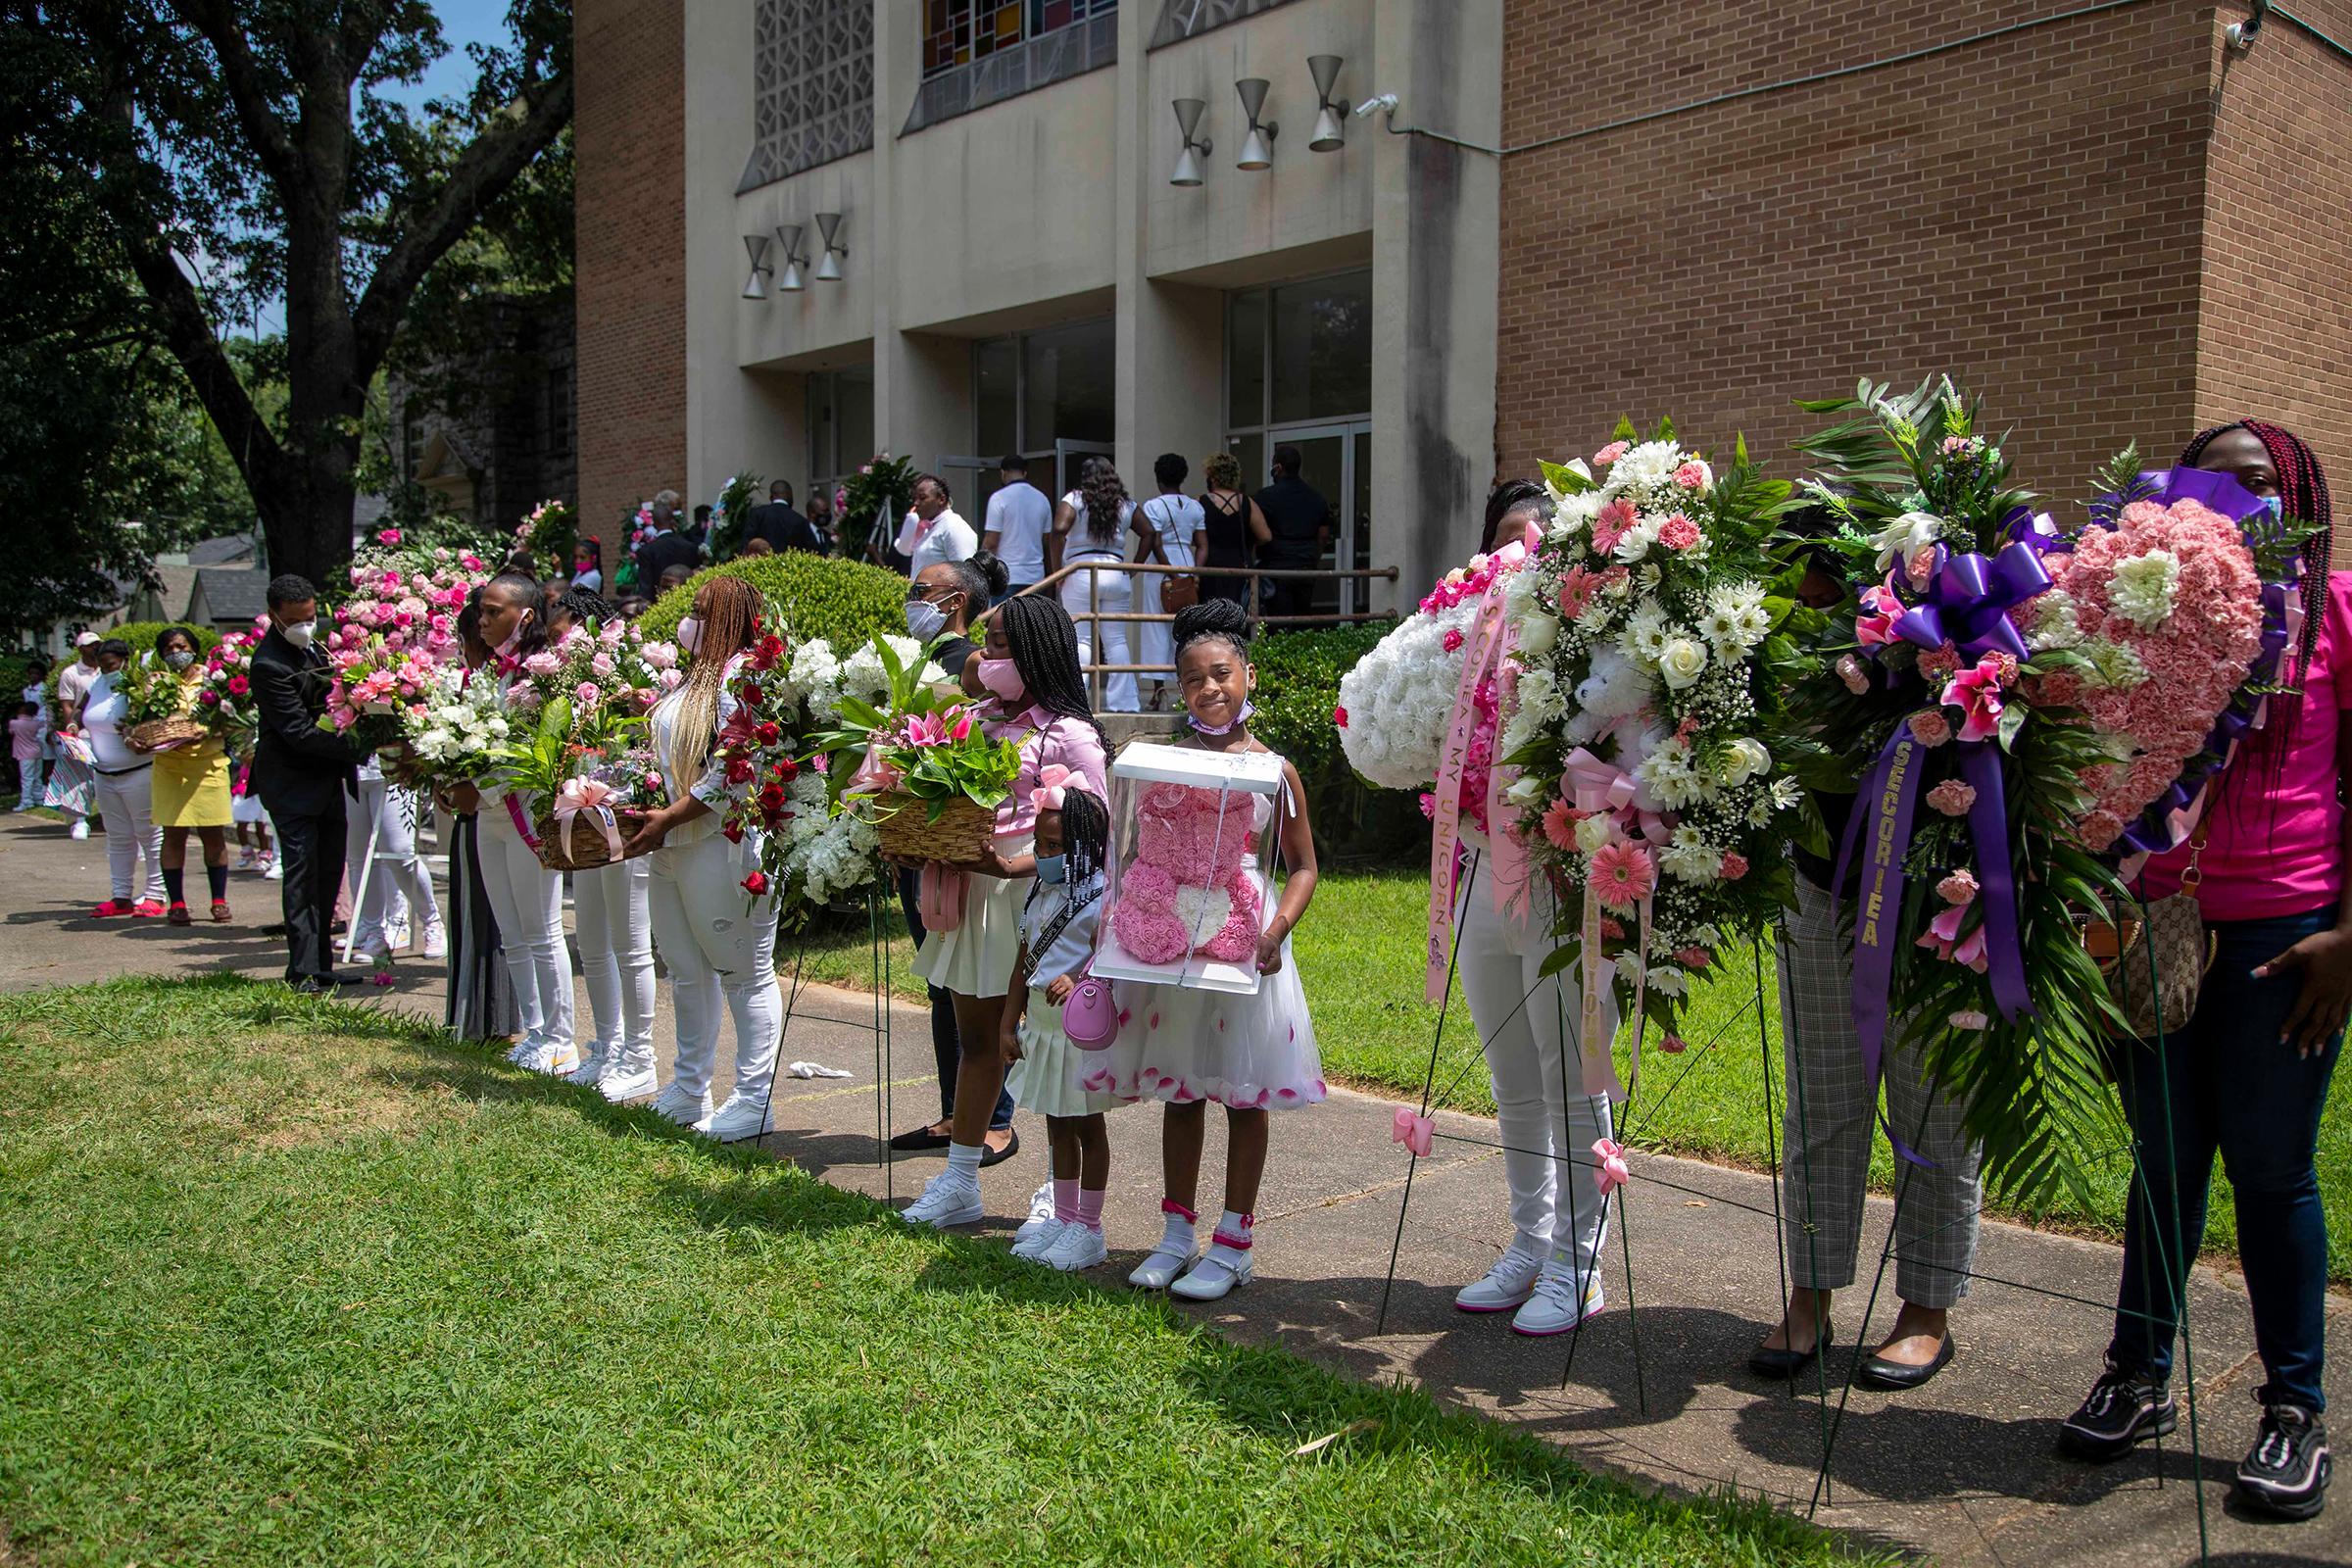 Family and friends of Secoriea Turneran eight-year-old who was fatally shot while in a car with her mother near the site where Rayshard Brooks was killed by a police officer weeks earlier, leading to protests against police brutality, present floral arrangements during her home-going service at New Calvary Missionary Baptist Church in Atlanta on July 15, 2020.